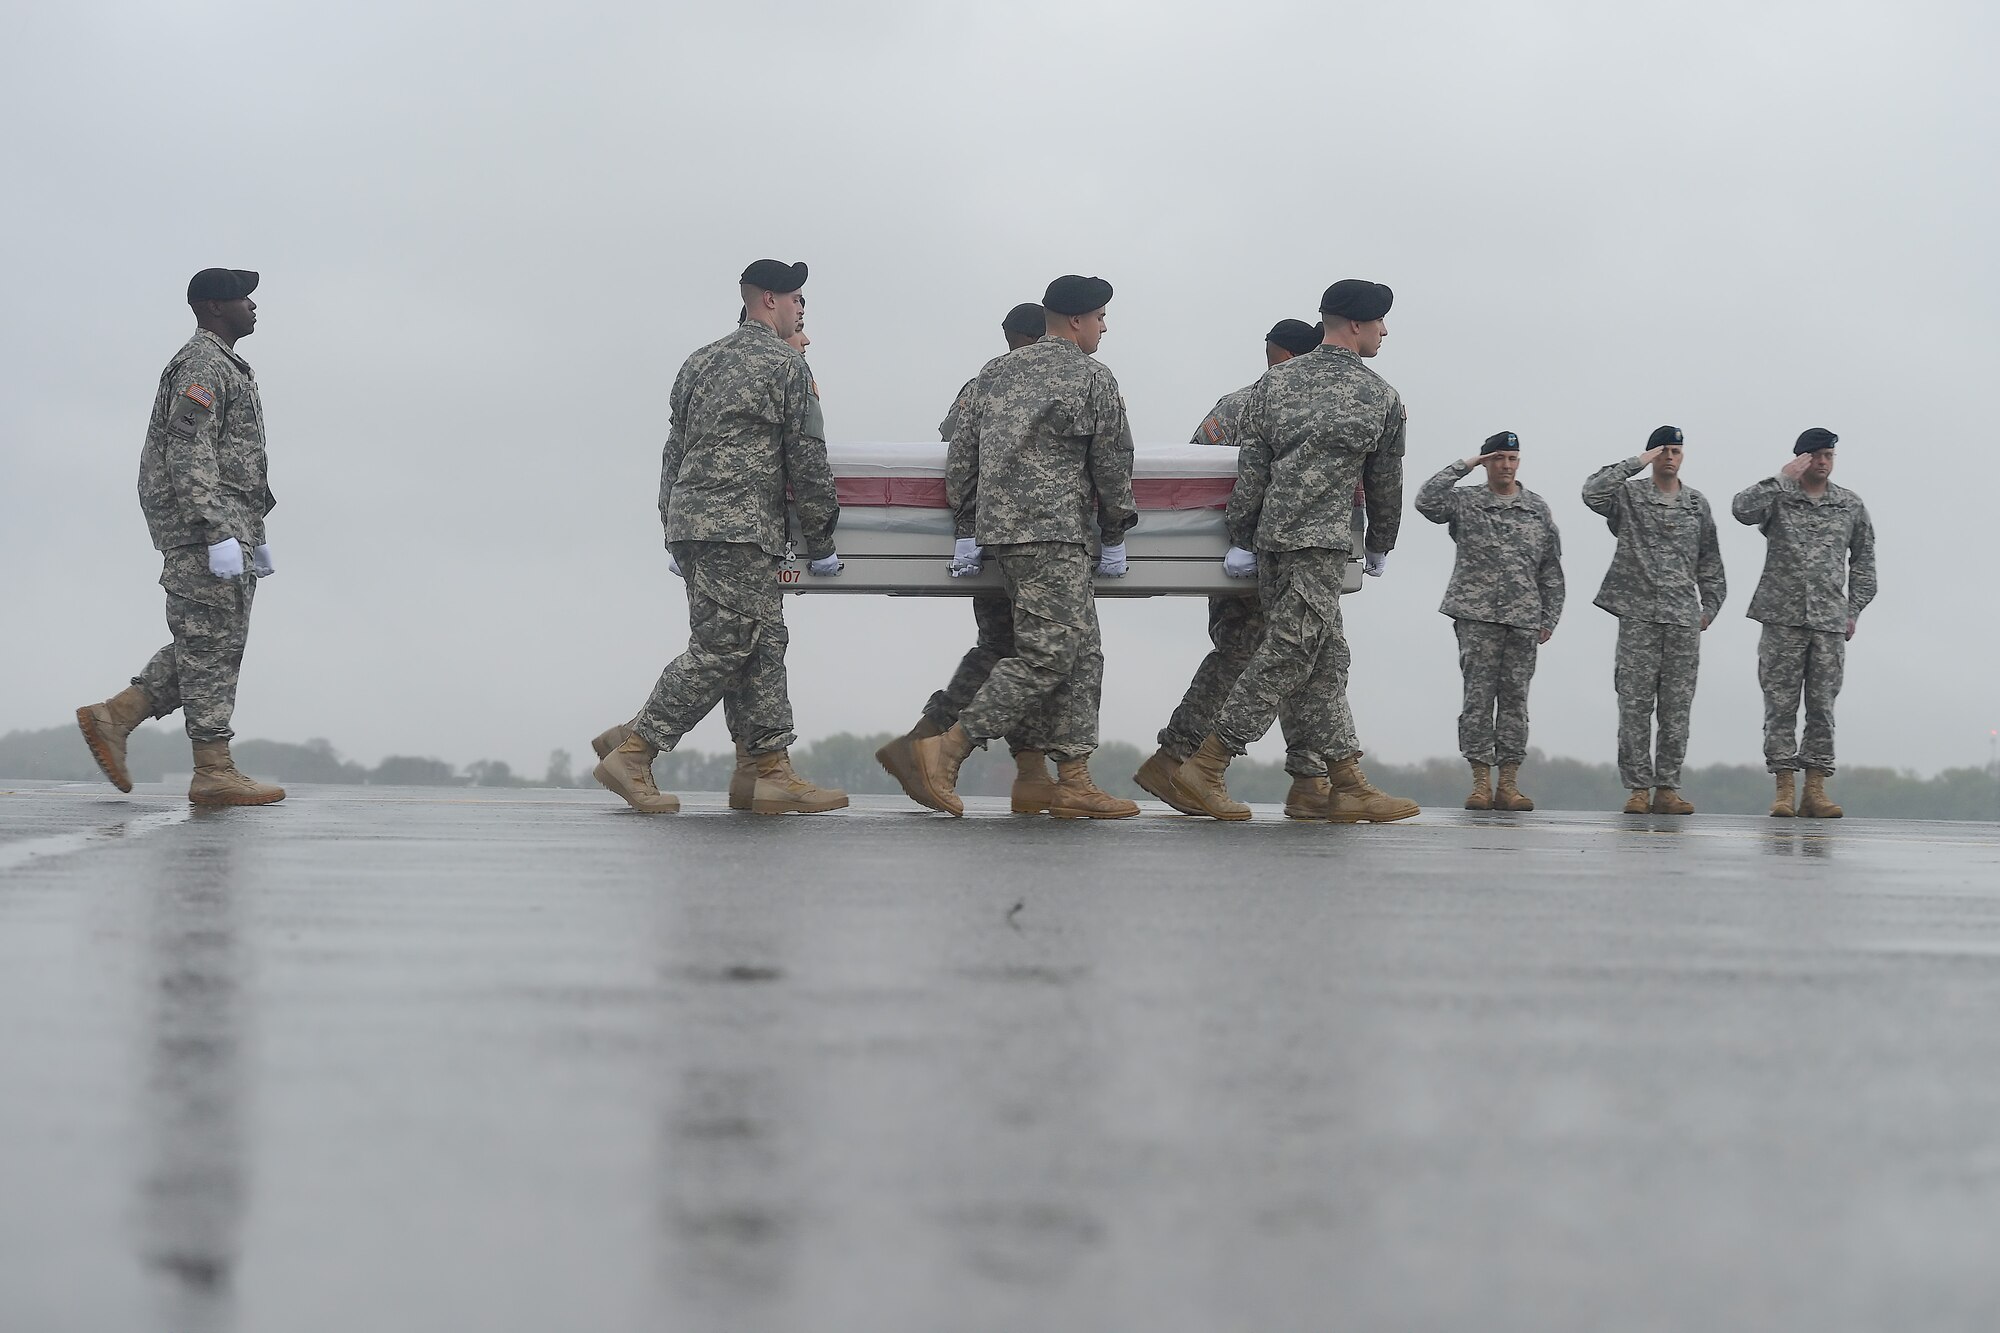 A U.S. Army carry team transfers the remains of Pfc. Christian J. Chandler, of Trenton, Texas, during a dignified transfer April 30, 2014 at Dover Air Force Base, Del. Chandler was assigned to Company B, 2nd Battalion, 87th Infantry Regiment, 3rd Brigade Combat Team, 10th Mountain Division (Light), Fort Drum, N.Y. (U.S. Air Force photo/Greg L. Davis)